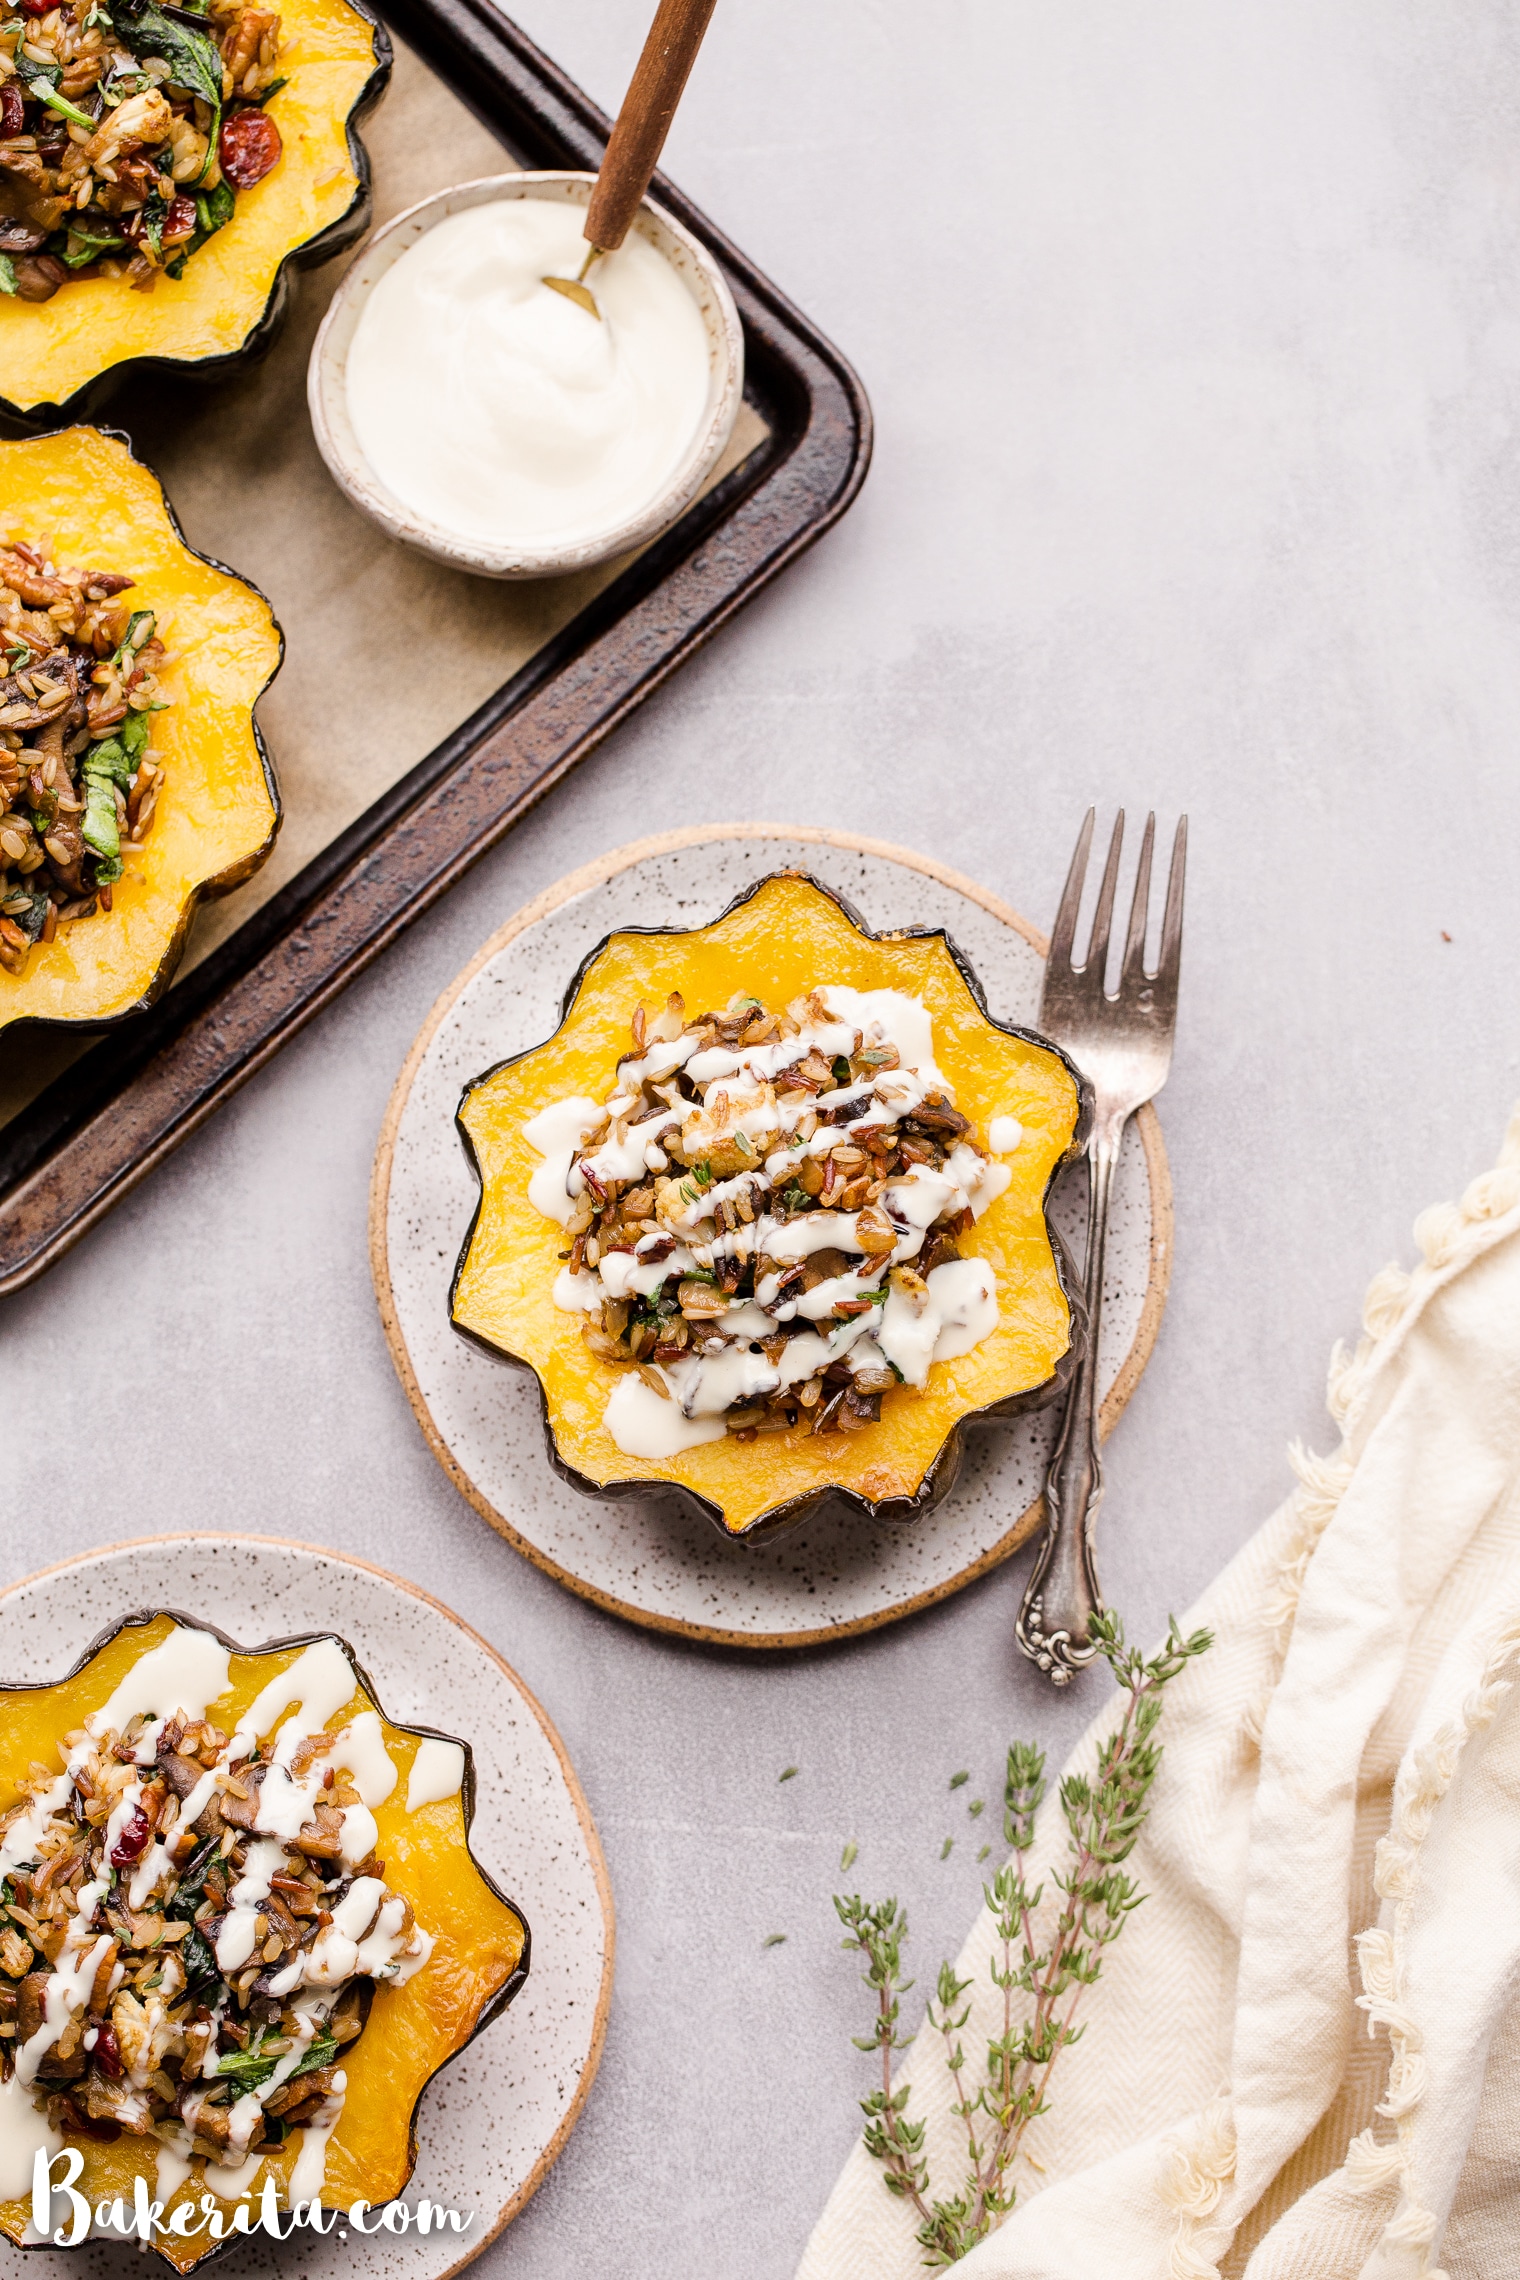 This Mushroom & Wild Rice Stuffed Acorn Squash is filled with caramelized onions, cauliflower florets, spinach, dried cranberries, and pecans. It's served with a drizzle of lemon tahini sauce. This comforting and colorful dish has a variety of texture, tons of flavor, and makes the perfect hearty dinner or side dish.